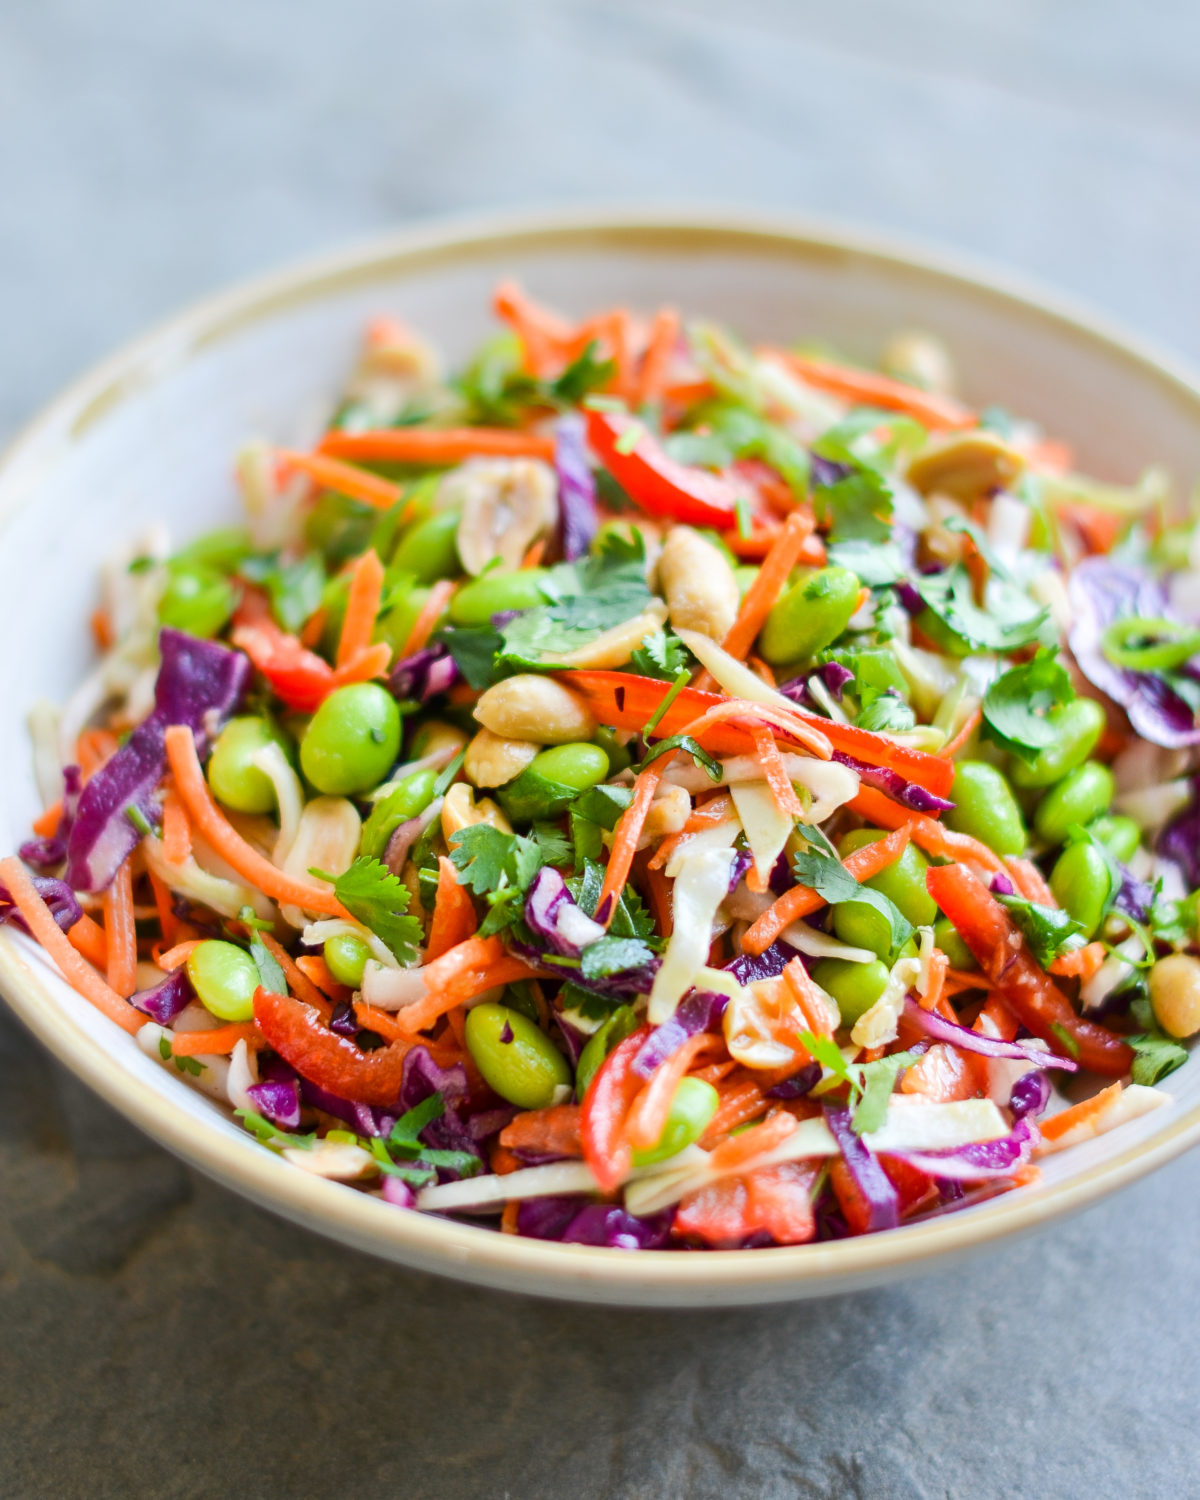 Weekly Meal Plan 9: Asian Slaw with Ginger Peanut Dressing at Once Upon a Chef